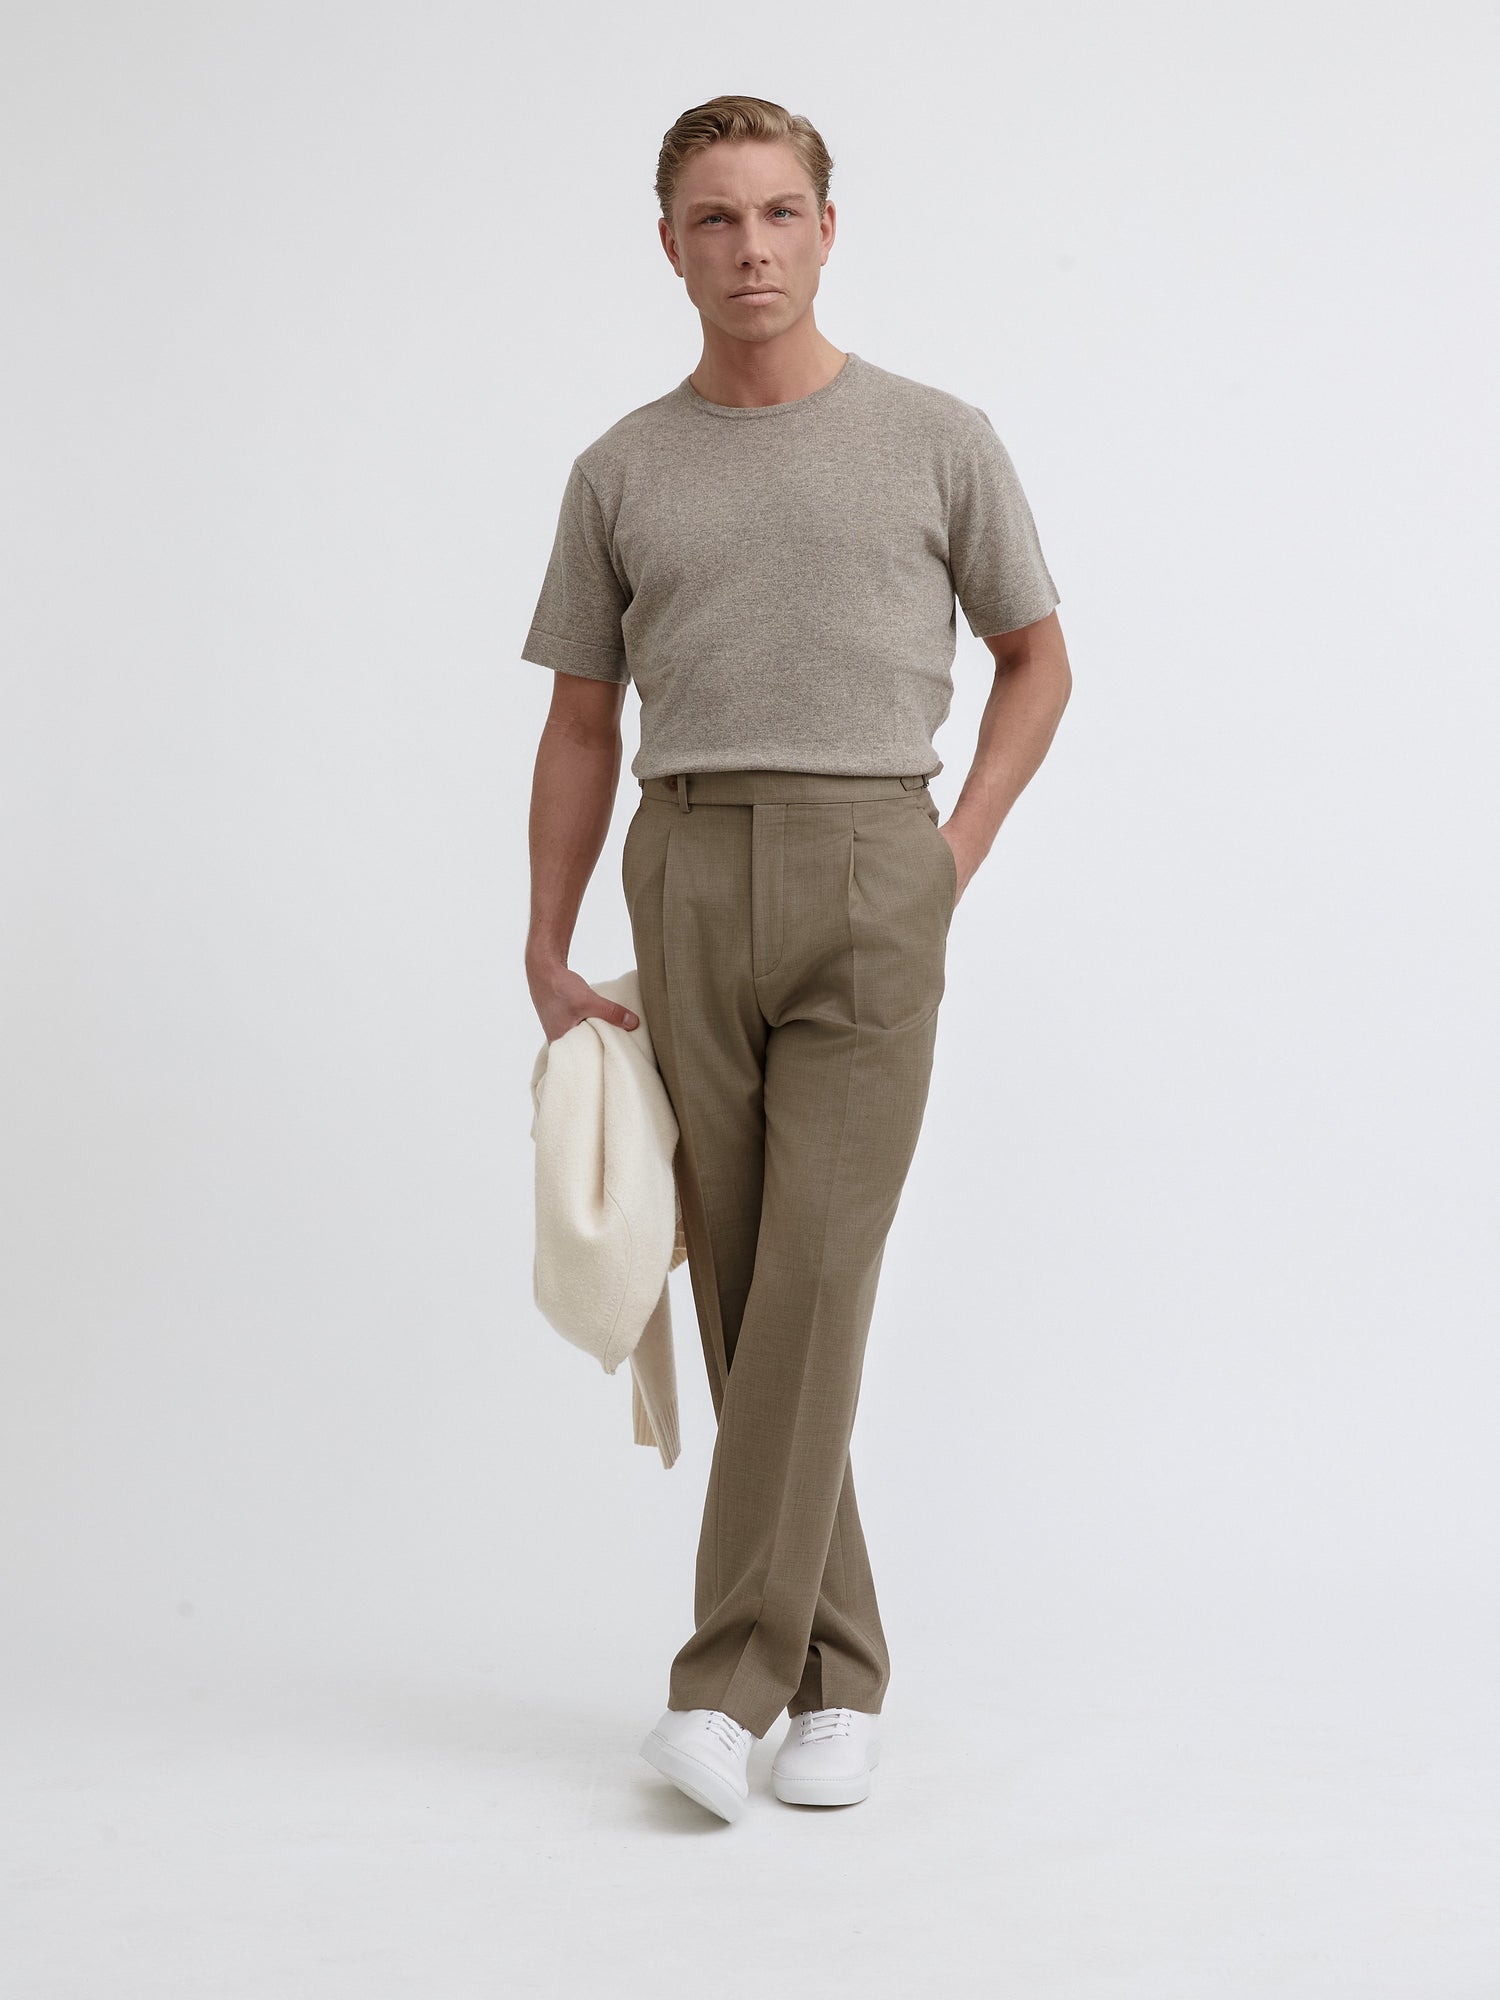 Taupe Merino Wool Cashmere T-shirt - Grand Le Mar